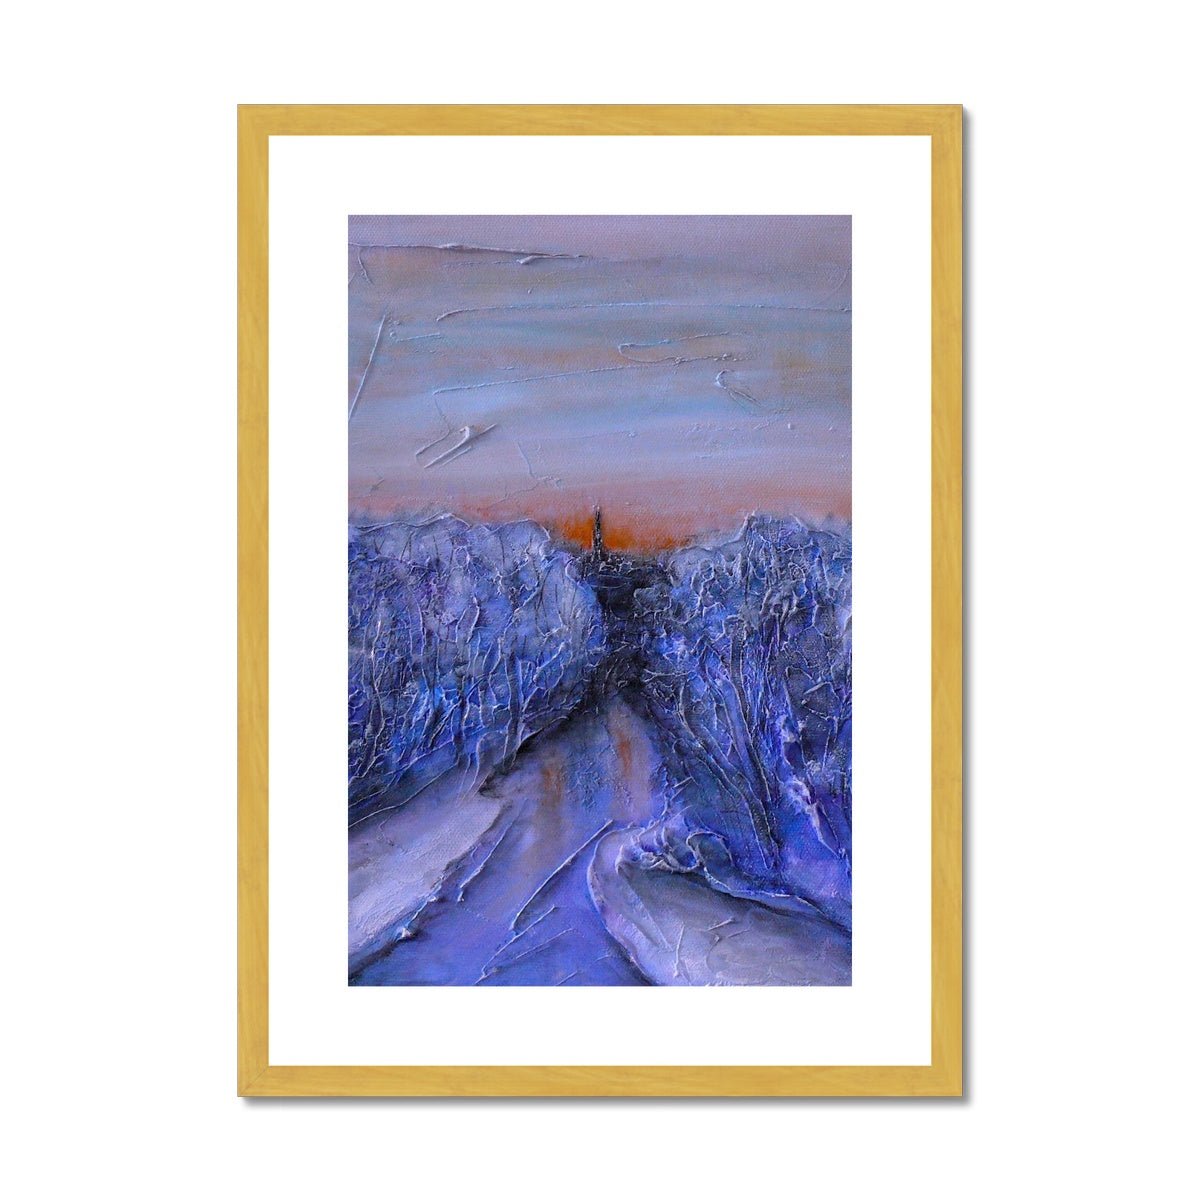 A Frozen River Kelvin Painting | Antique Framed & Mounted Prints From Scotland-Antique Framed & Mounted Prints-Edinburgh & Glasgow Art Gallery-A2 Portrait-Gold Frame-Paintings, Prints, Homeware, Art Gifts From Scotland By Scottish Artist Kevin Hunter